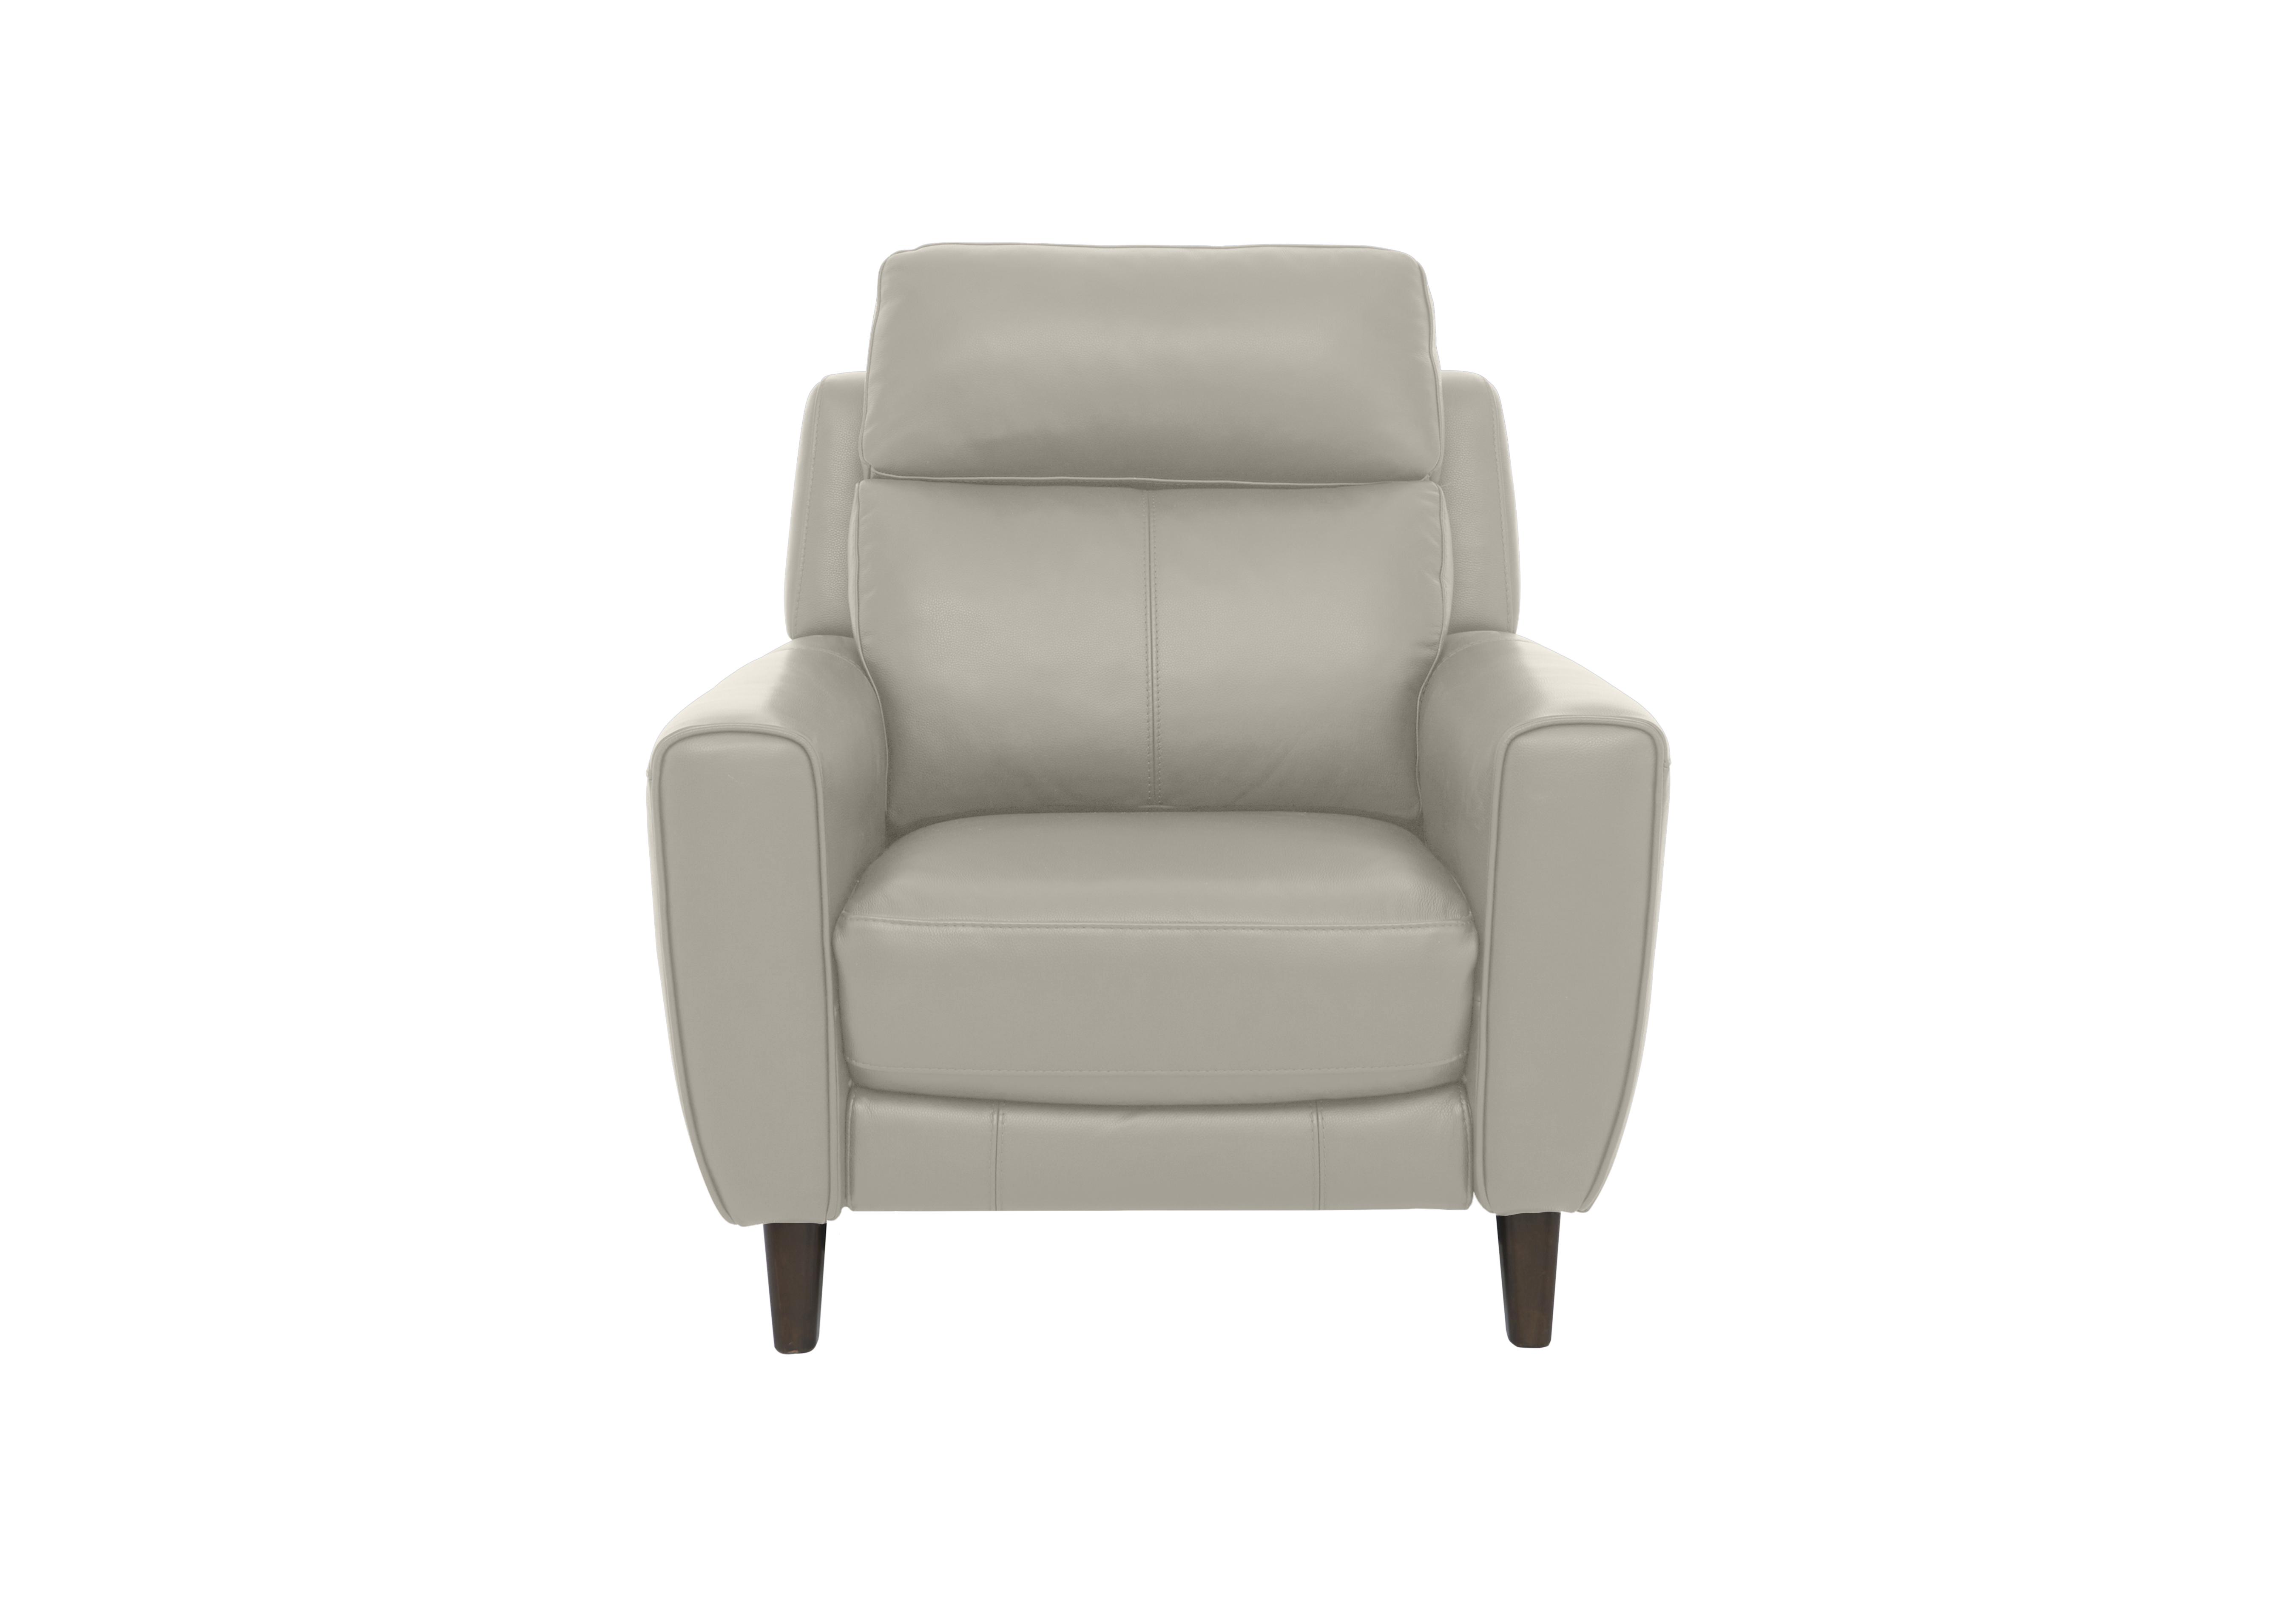 Zen Leather Chair in Bx-251e Grey on Furniture Village